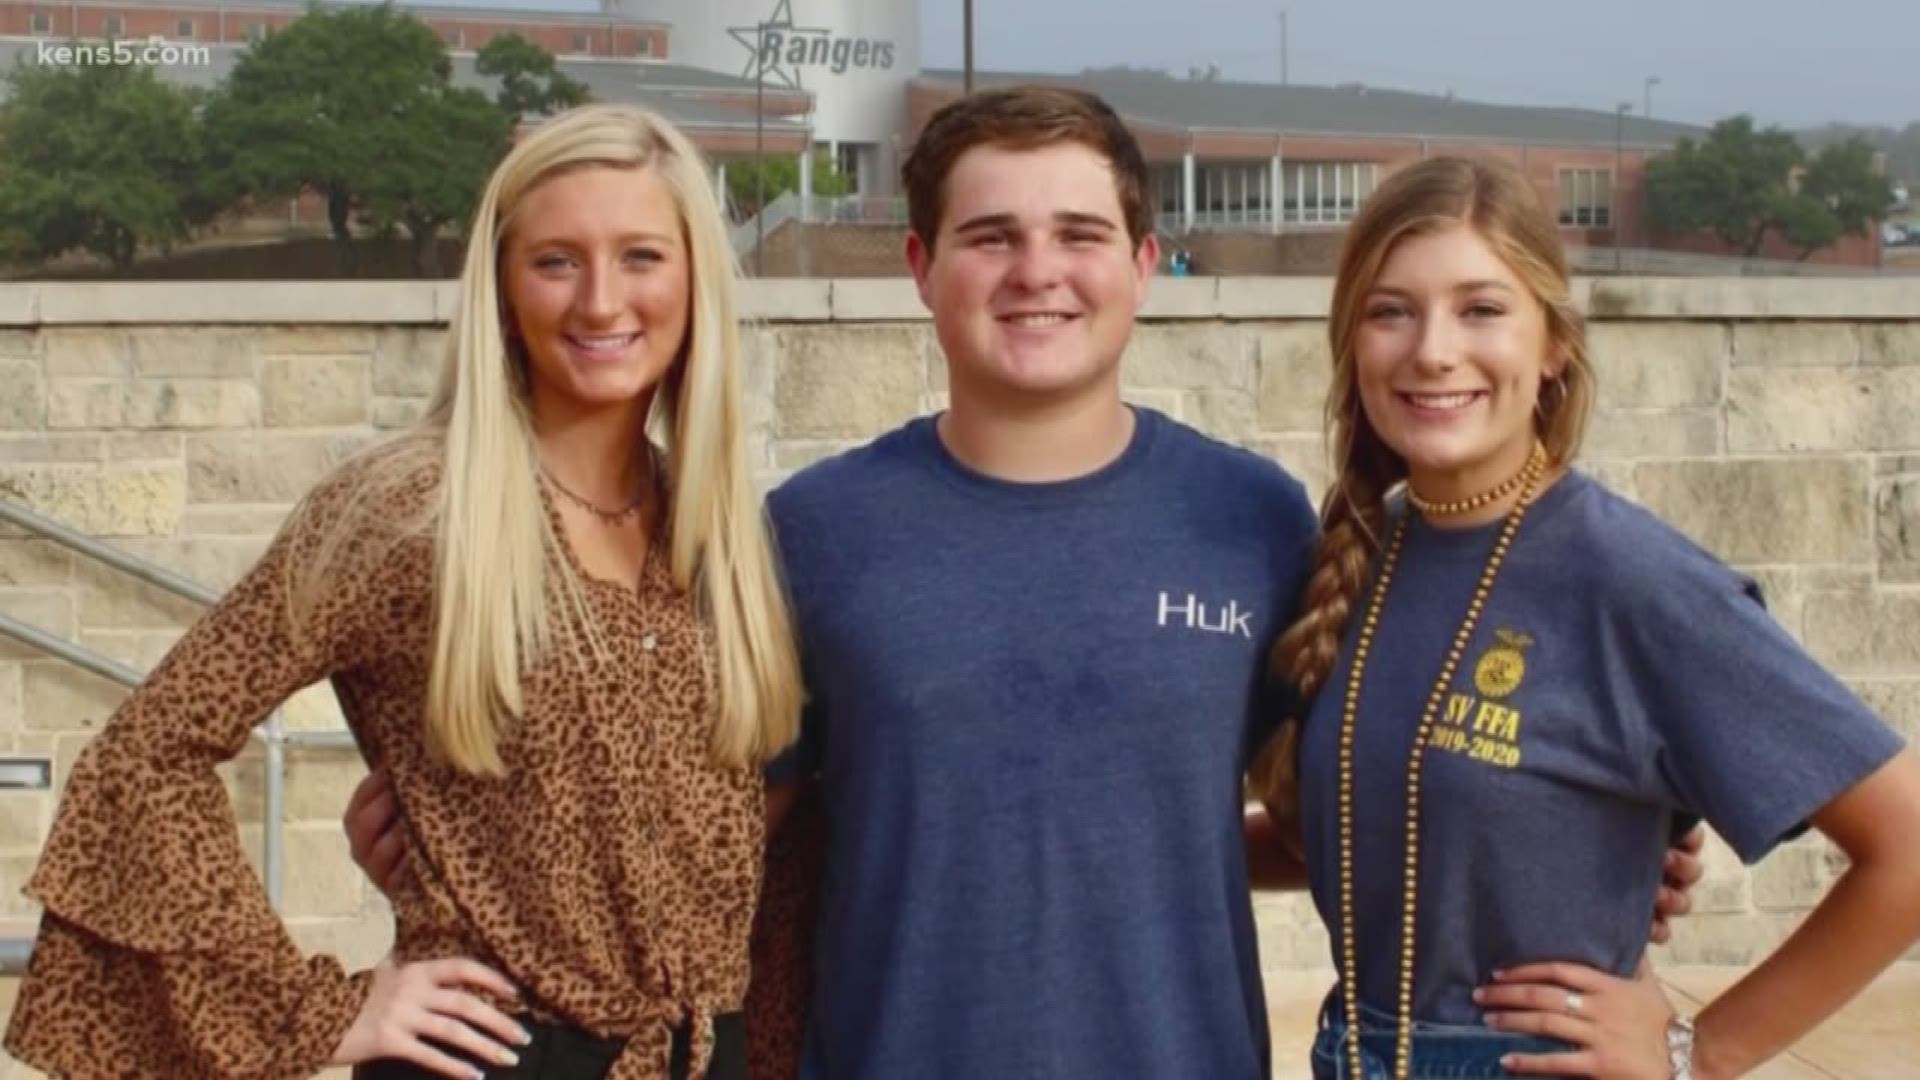 Cancer has found a fierce foe at Smithson Valley High, where a group of warm-hearted students are raising money to fight Leukemia and Lymphoma.